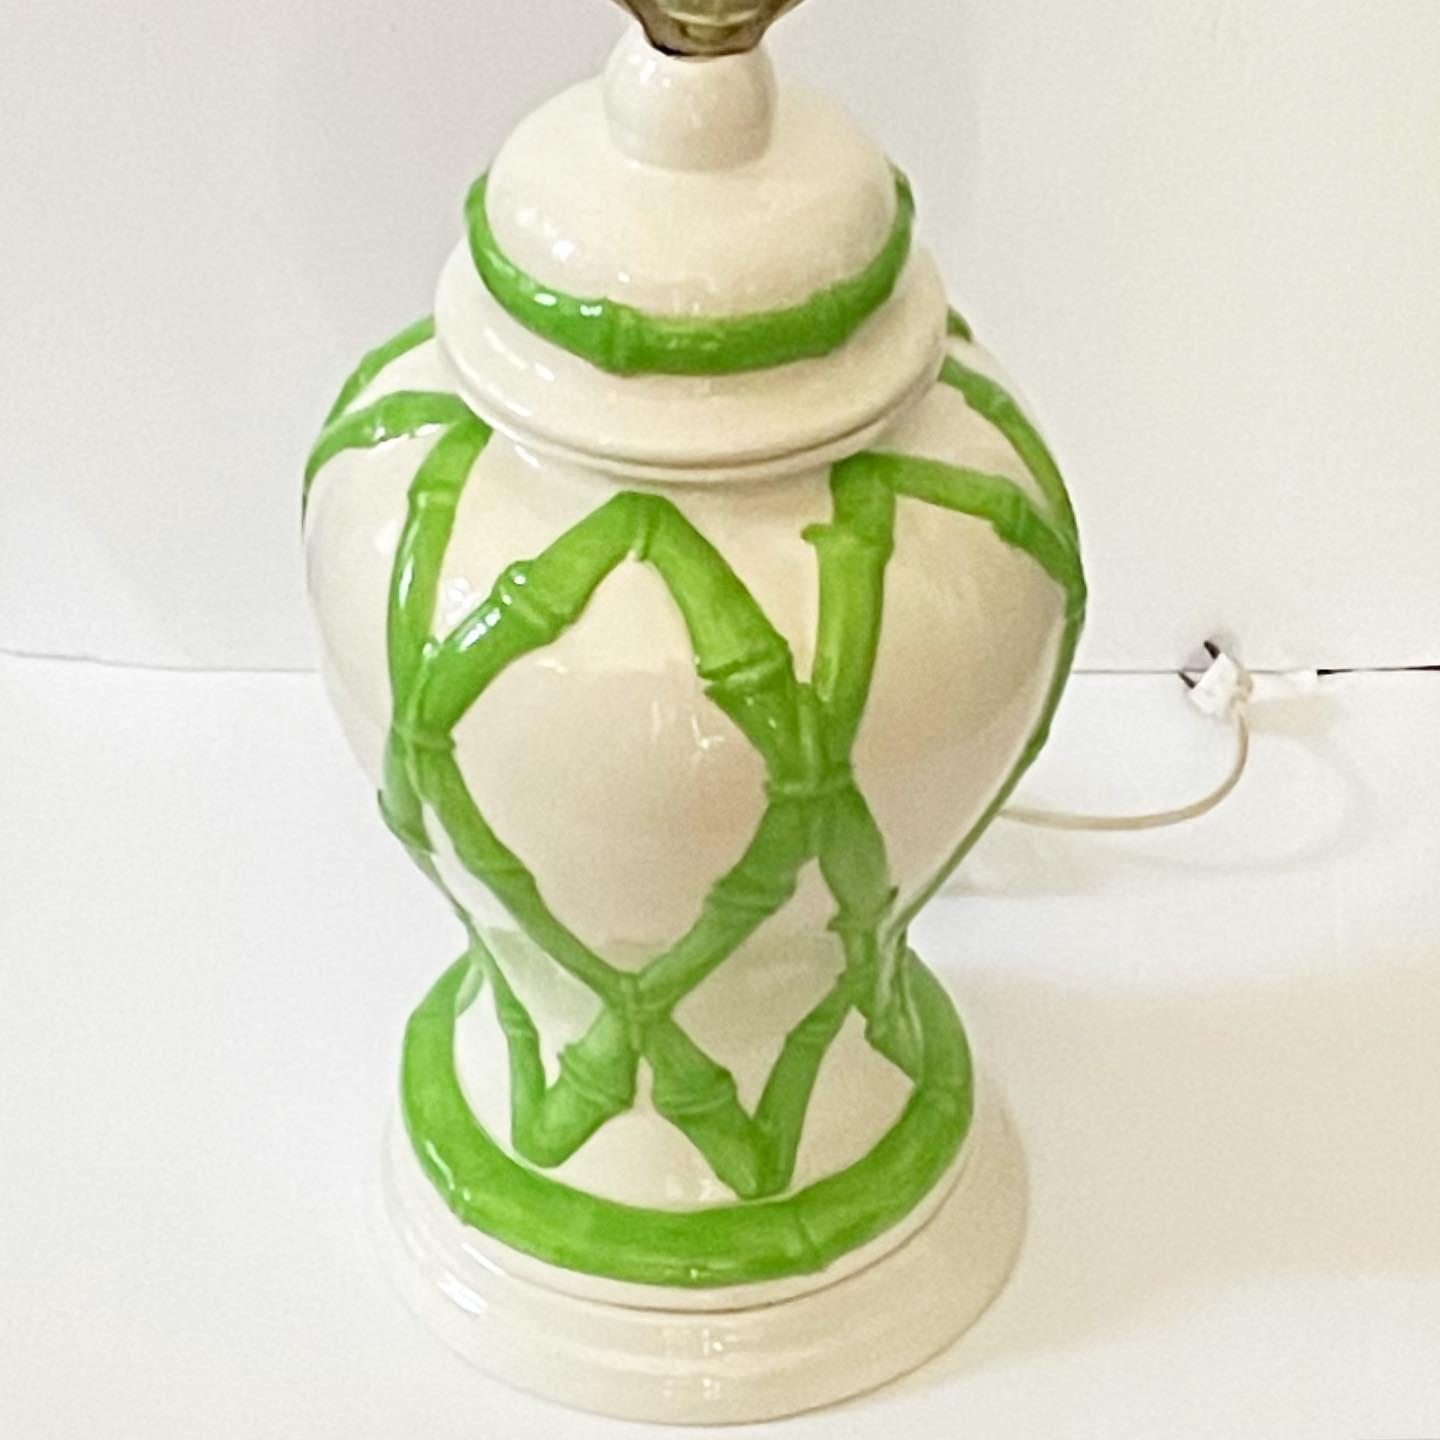 1970s Palm Beach Chic Ceramic Lamp With Bamboo Motif